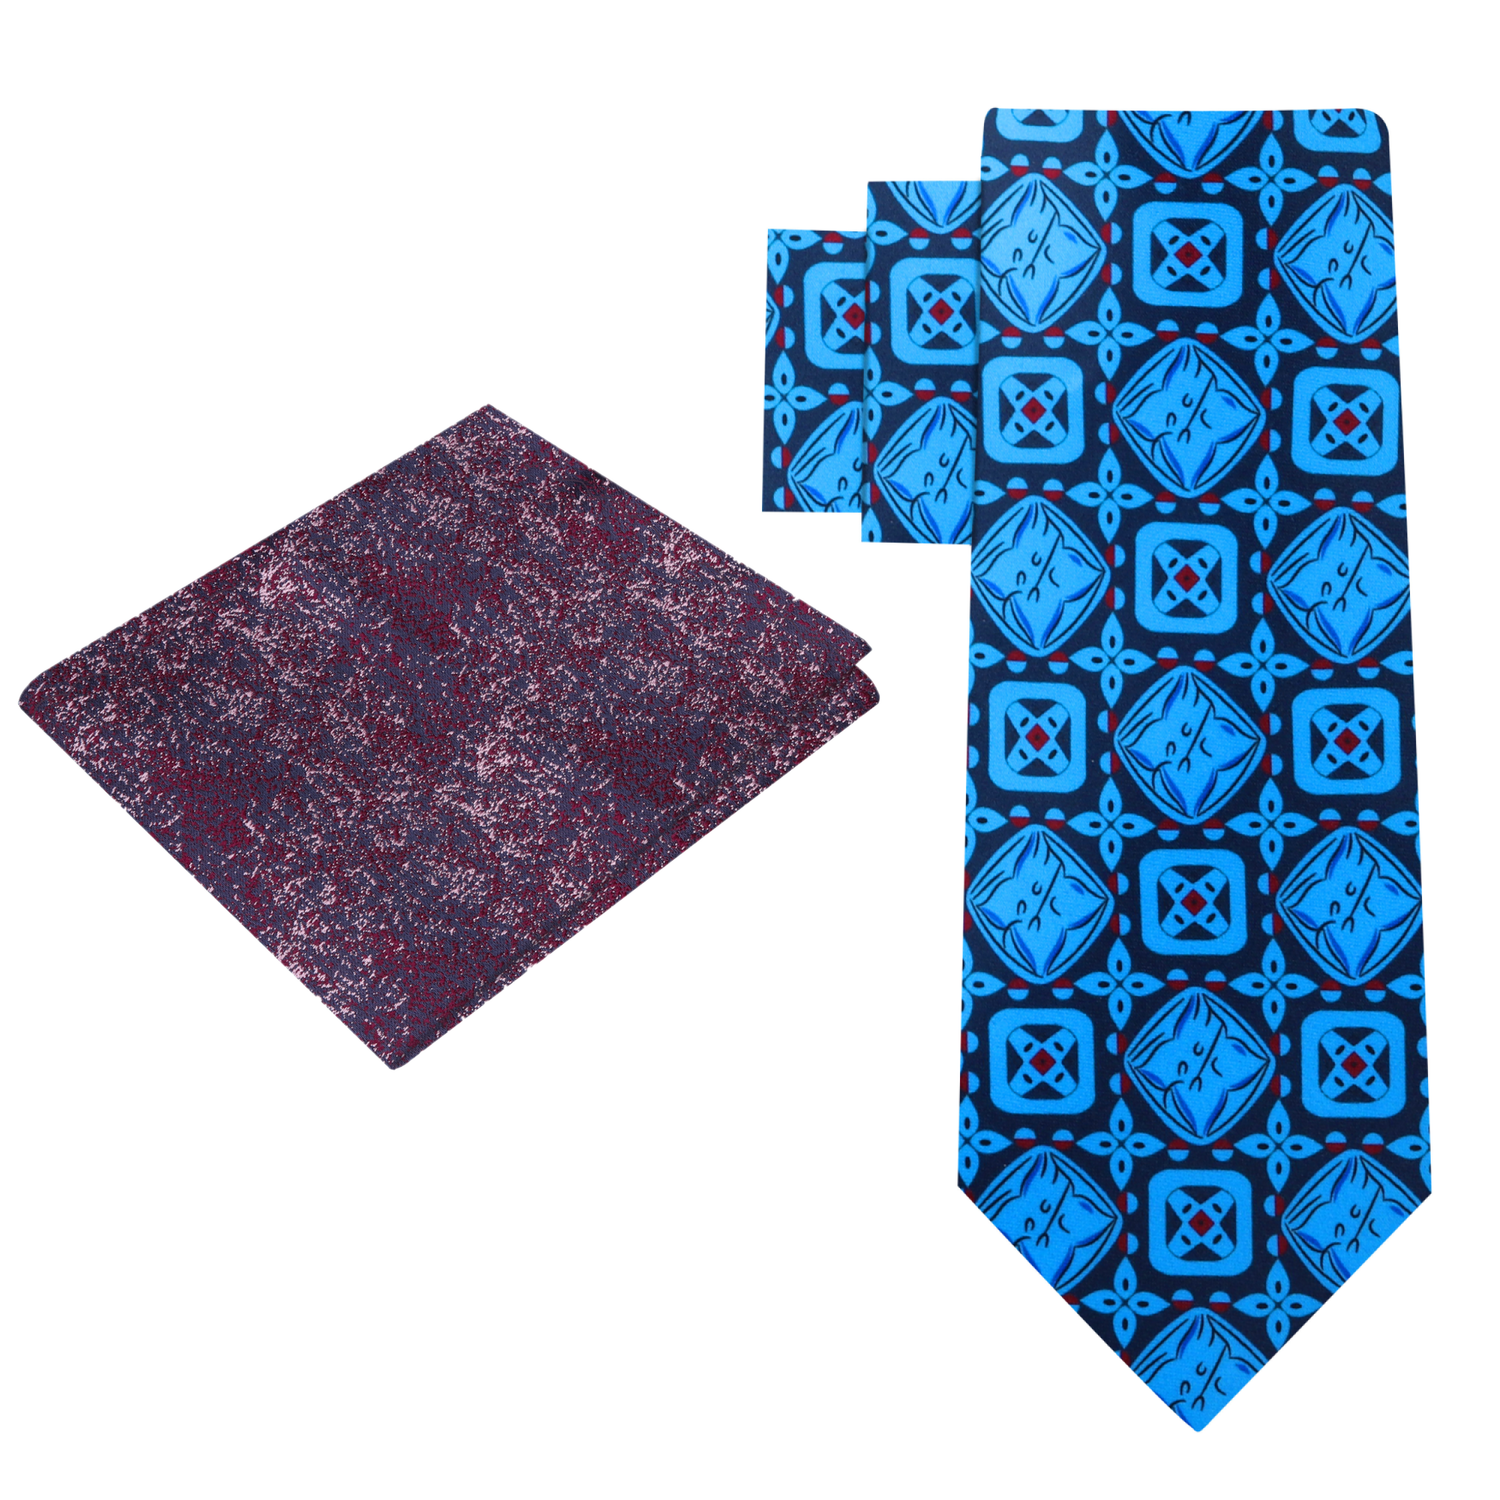 Alt View: Blue Emeralds Necktie and Accenting Burgundy Square